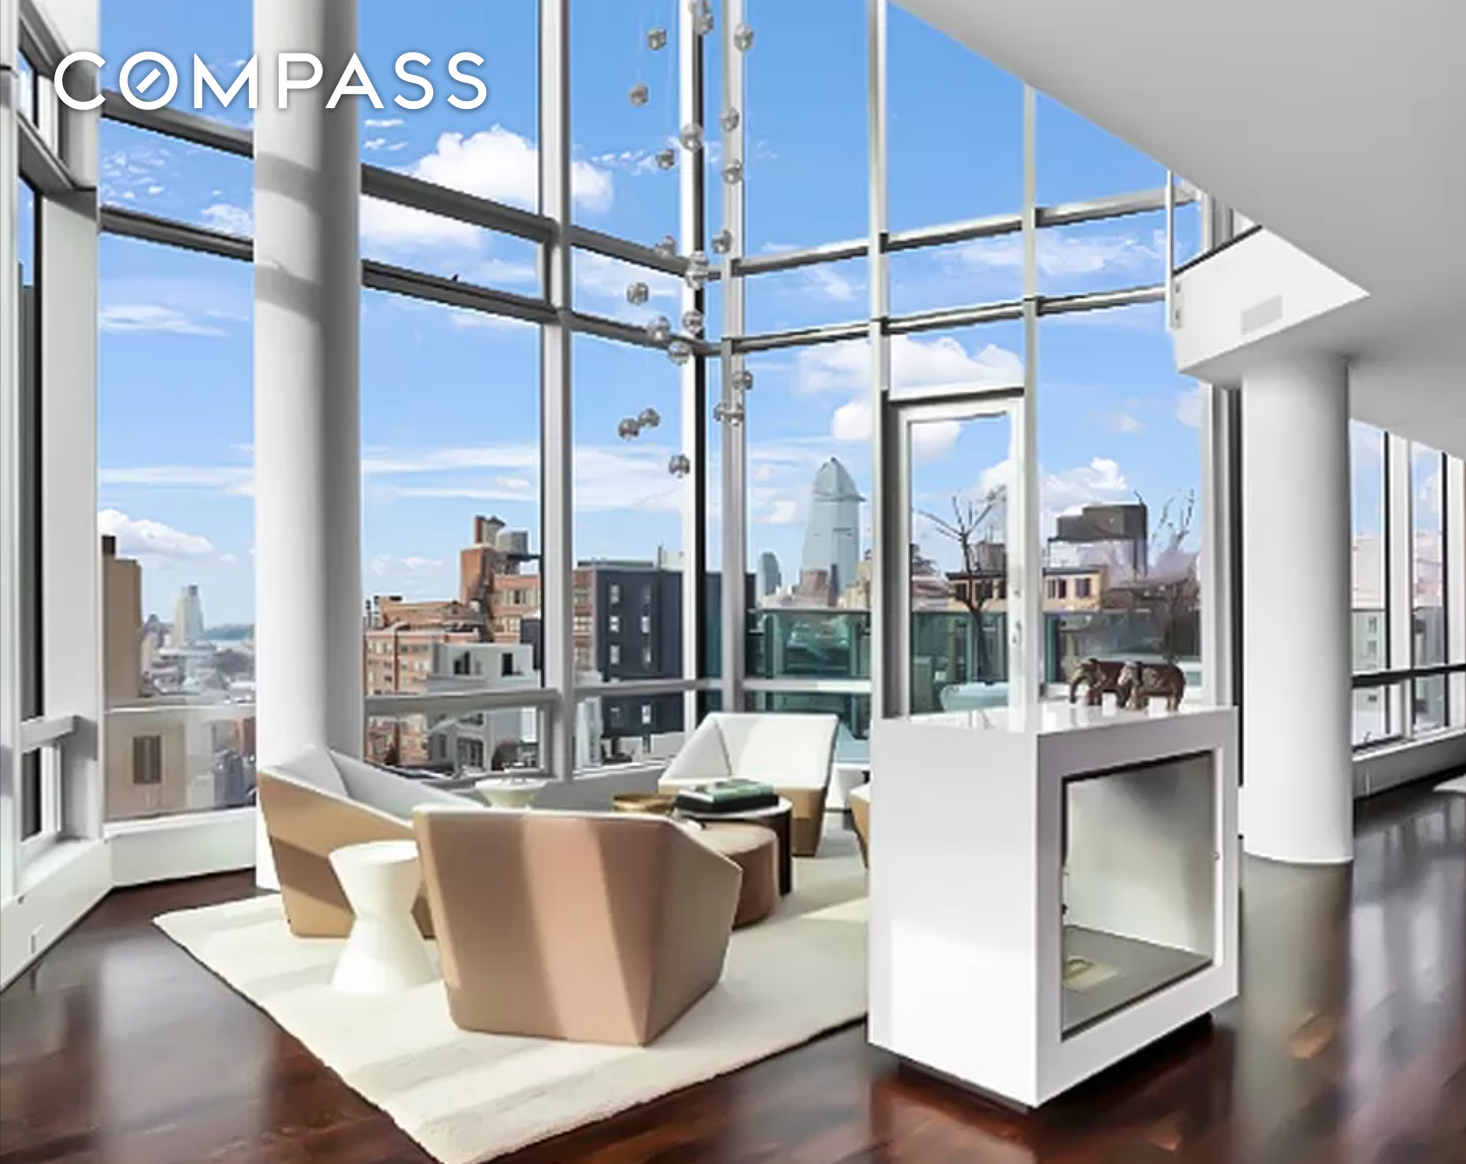 166 West 18th Street Pha, Chelsea, Downtown, NYC - 3 Bedrooms  
3.5 Bathrooms  
6 Rooms - 